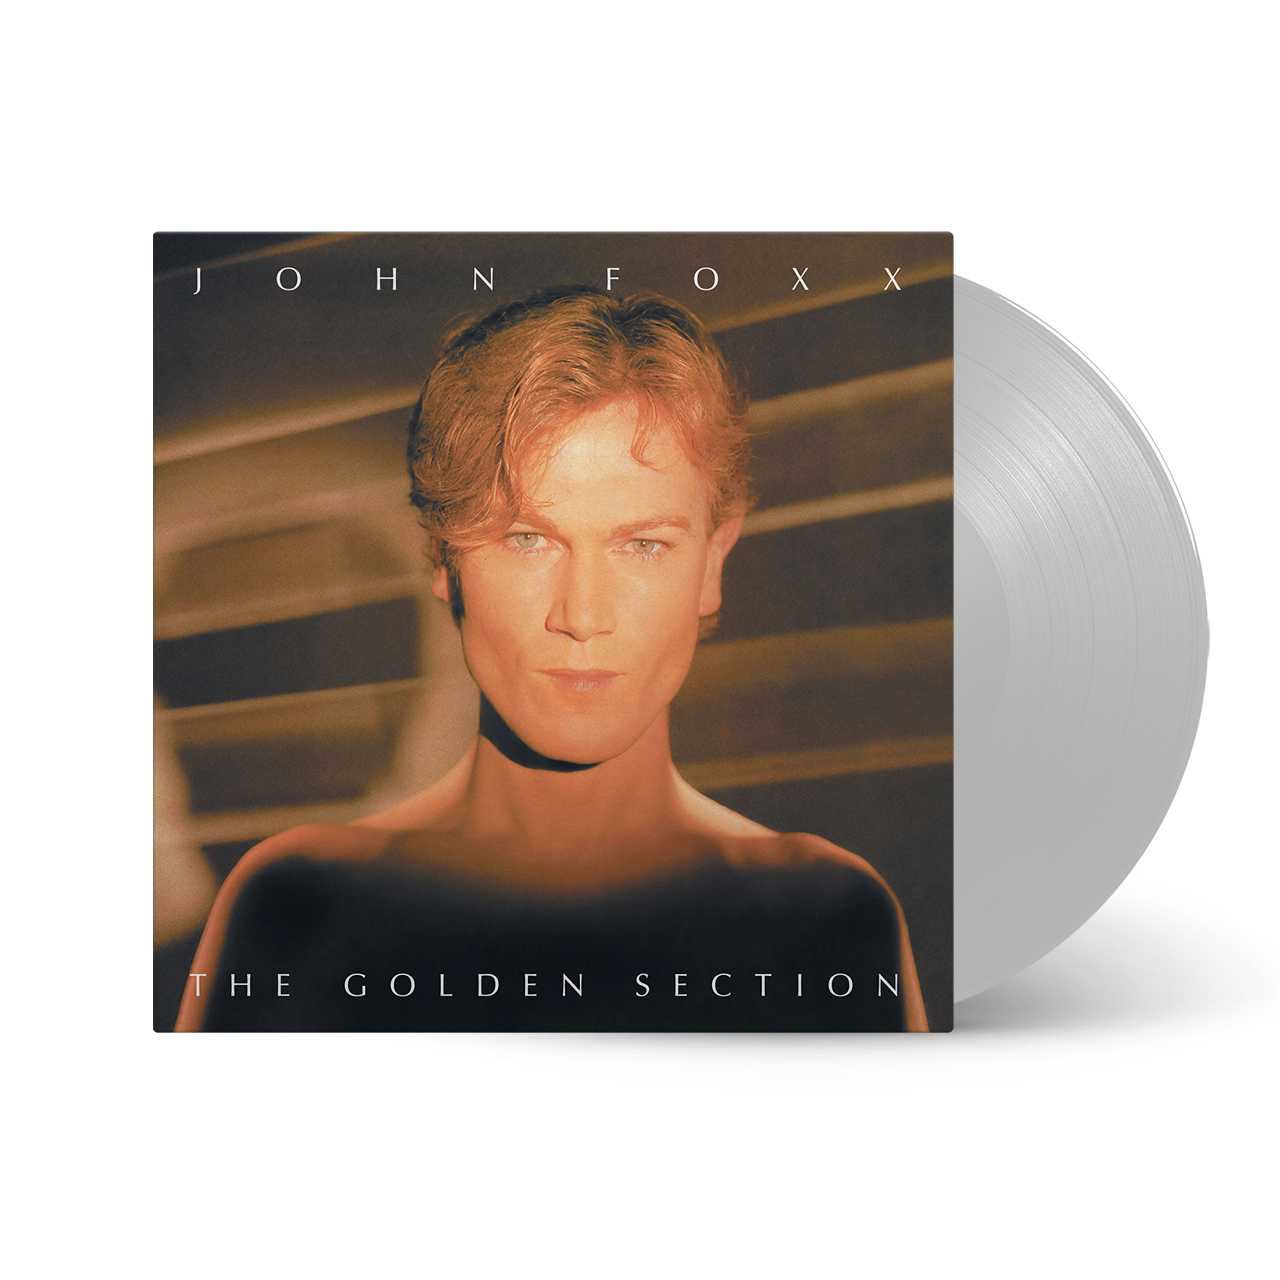 John Foxx - The Golden Section (40th Anniversary Edition): Limited Clear Vinyl LP